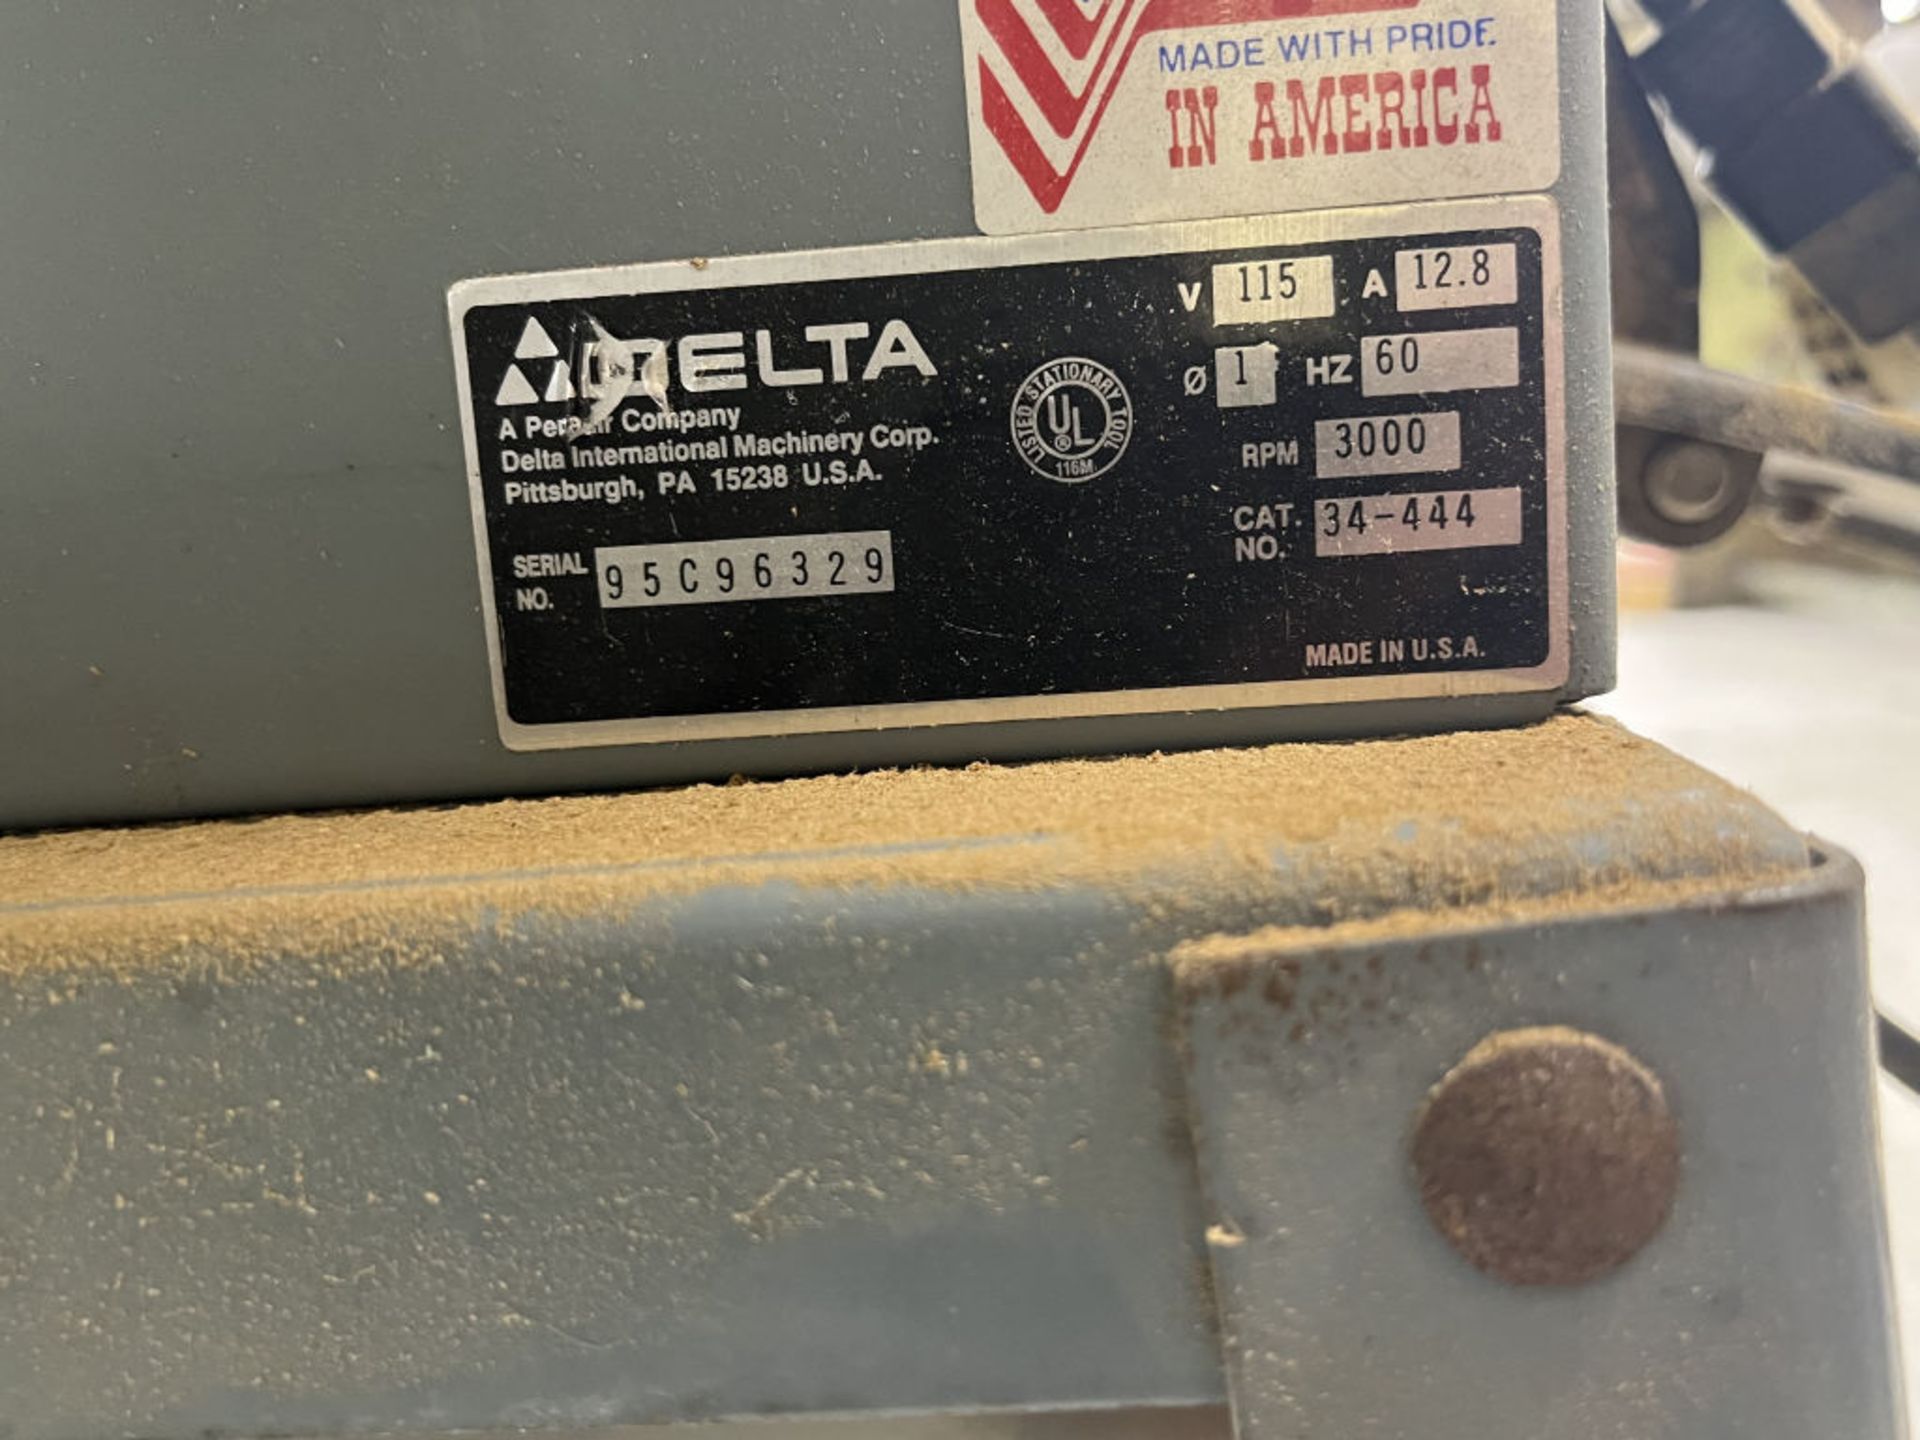 Delta 10" Contractor Saw - Image 4 of 4